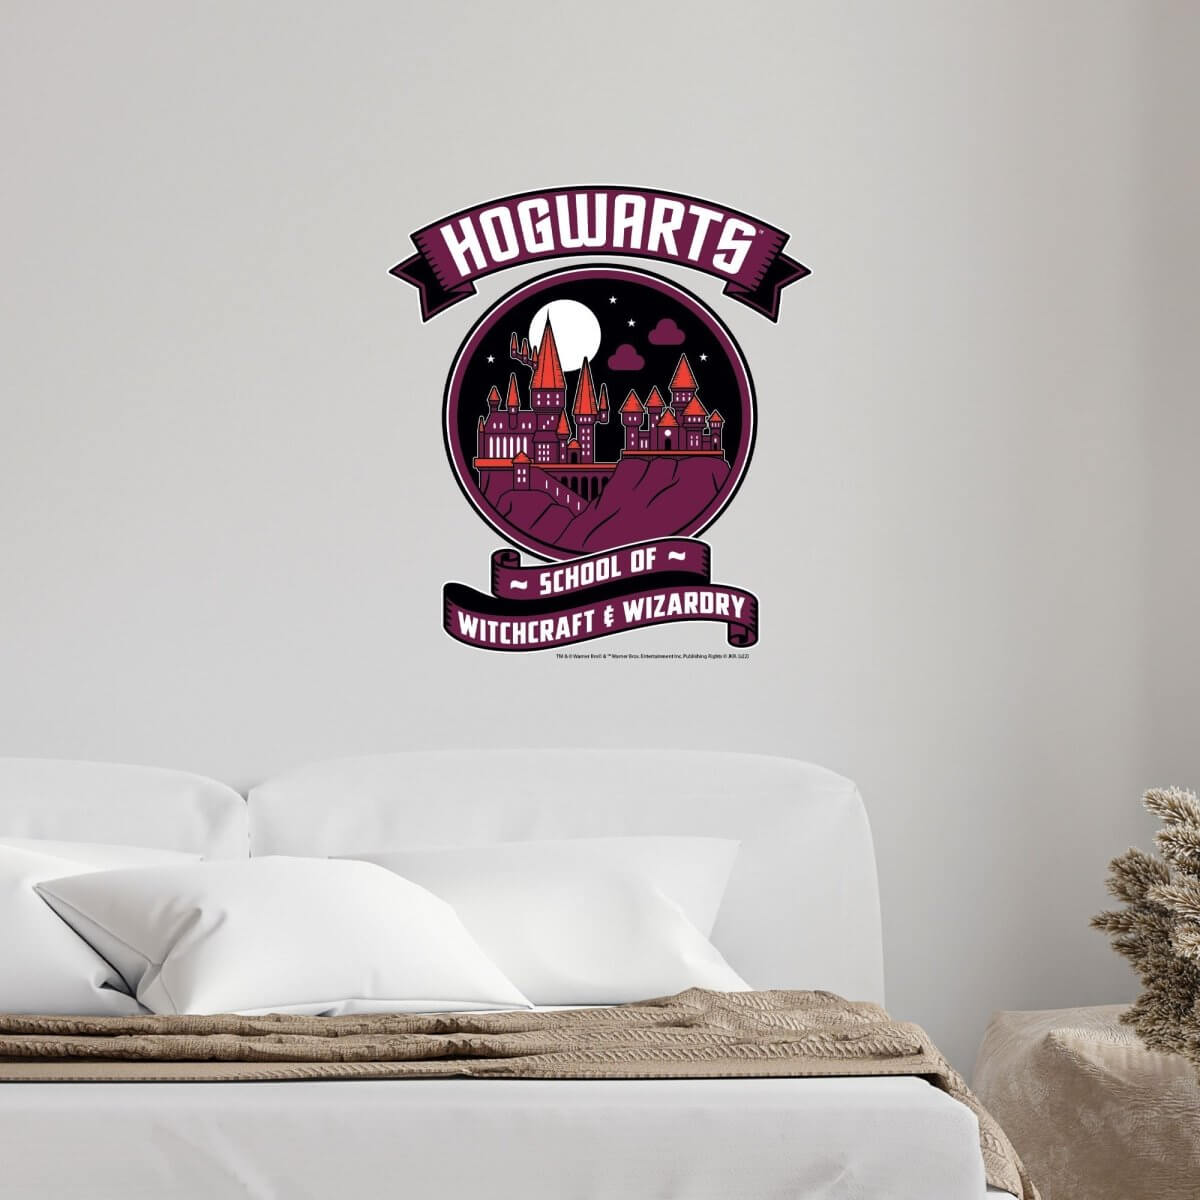 Cartoon Harry Potter Wall Decals PVC Magic Academy Castle Wall Sticker  Murals For Kids Room And Nursery Decor Removable From Jy9146, $3.74